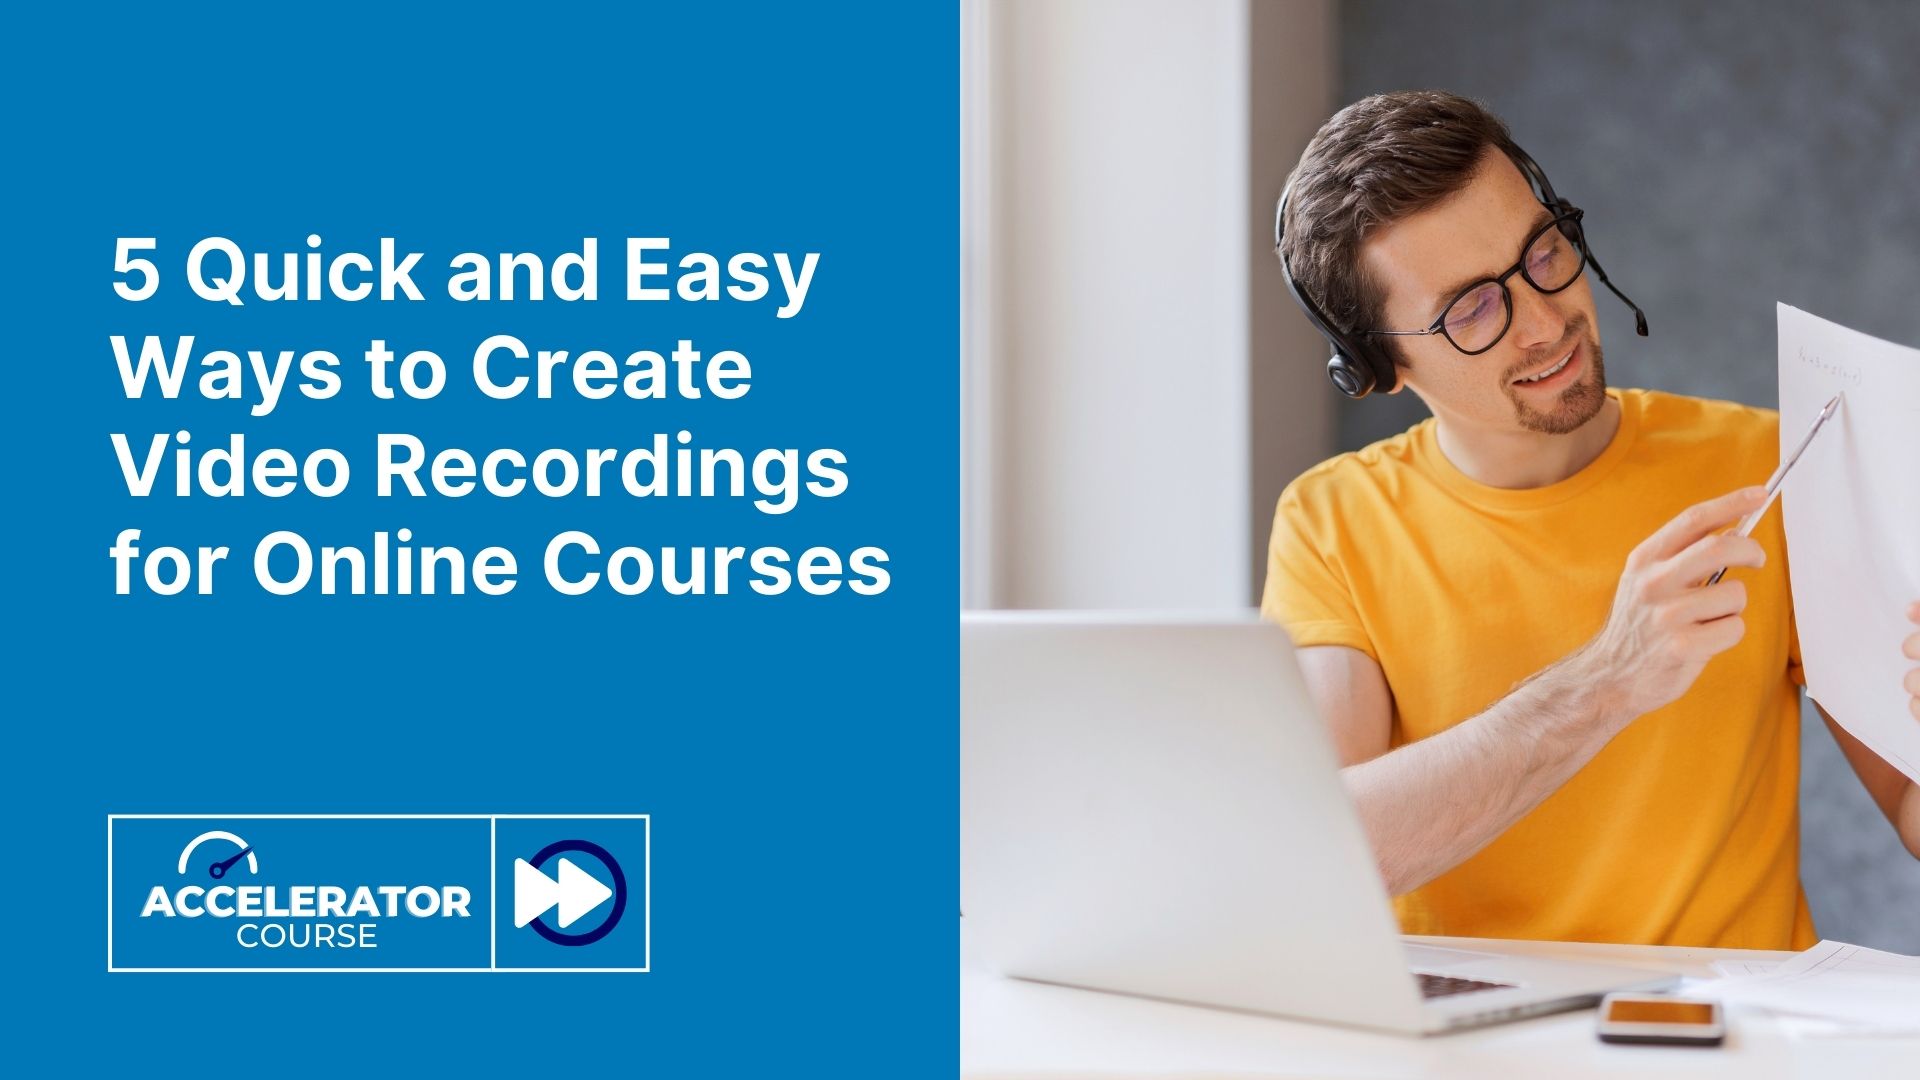 5-Quick-and-Easy-Ways-to-Create-Video-Recordings-for-Online-Courses.jpg